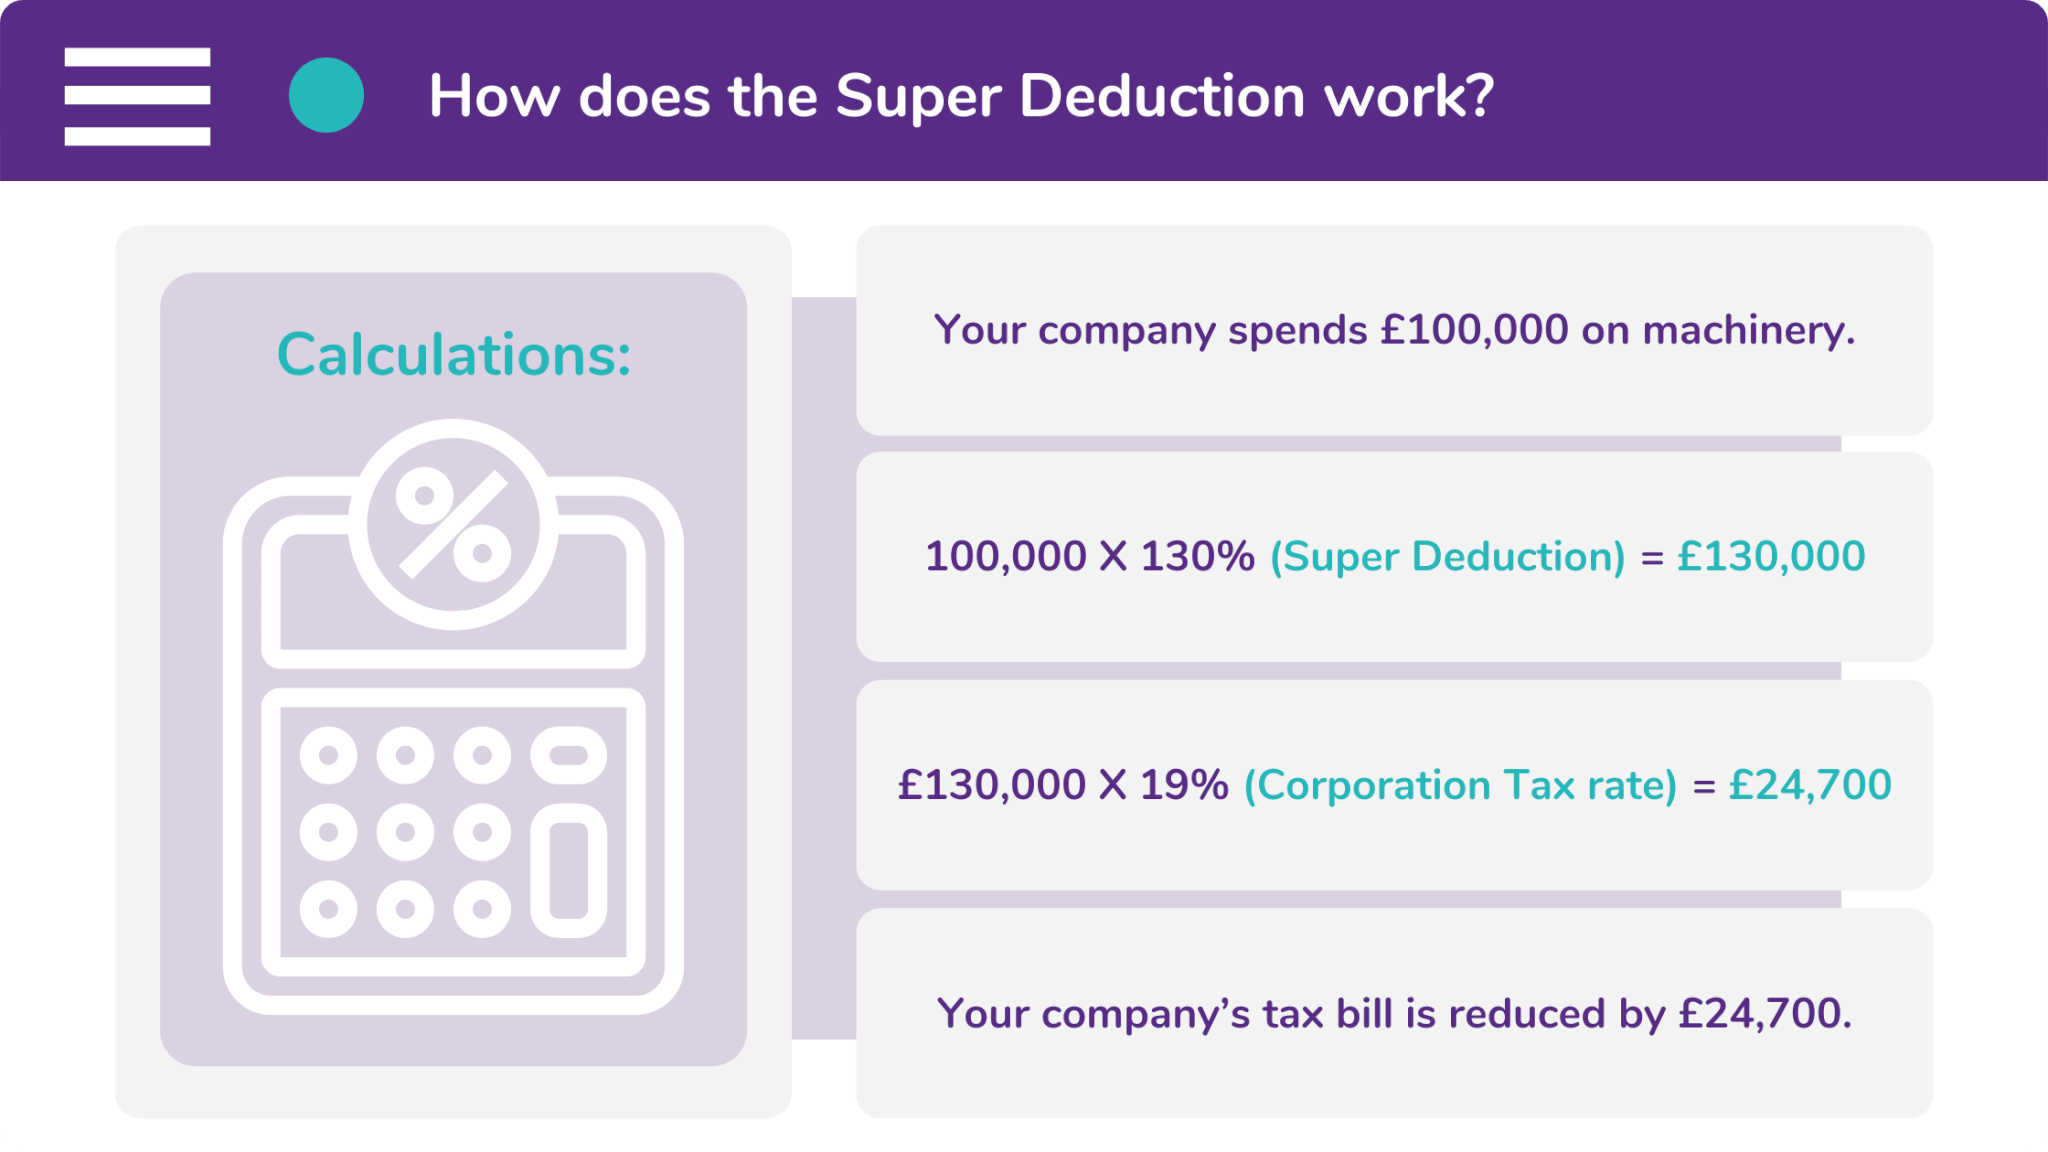 The Super Deduction works by increasing your purchase value before calculating the Corporation Tax rate.